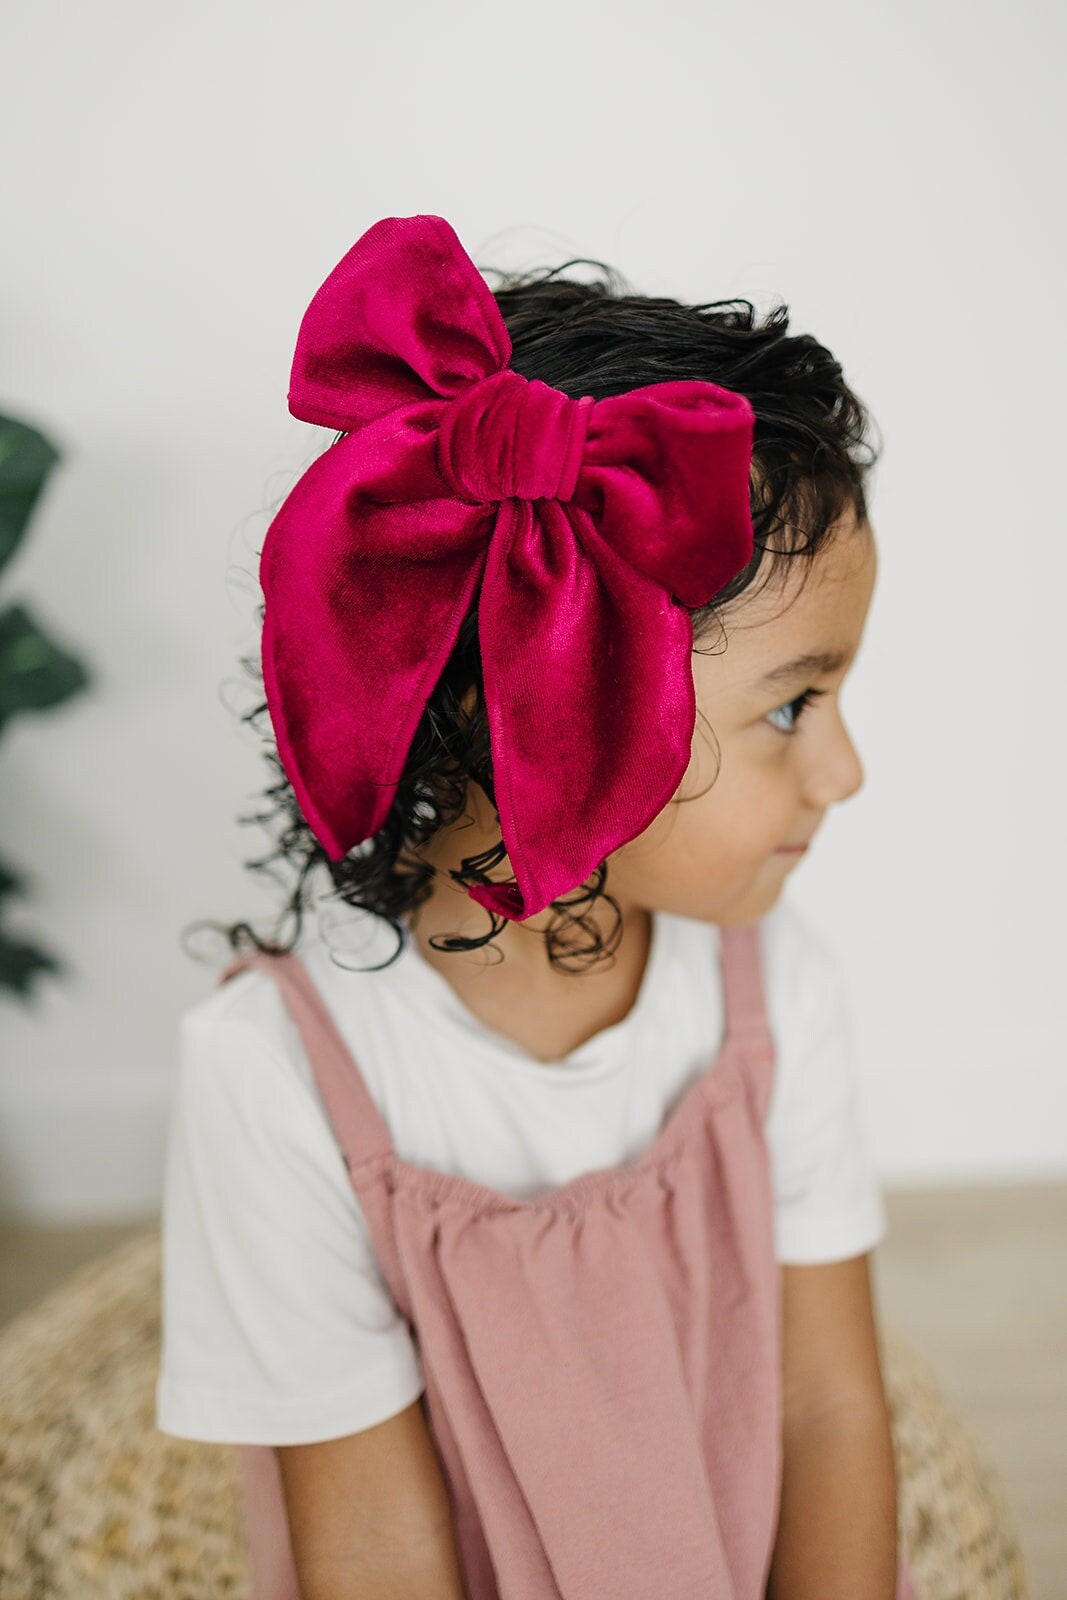 Big Bows for Girls (Texas Size Big Hair Bows) 20+ Colors